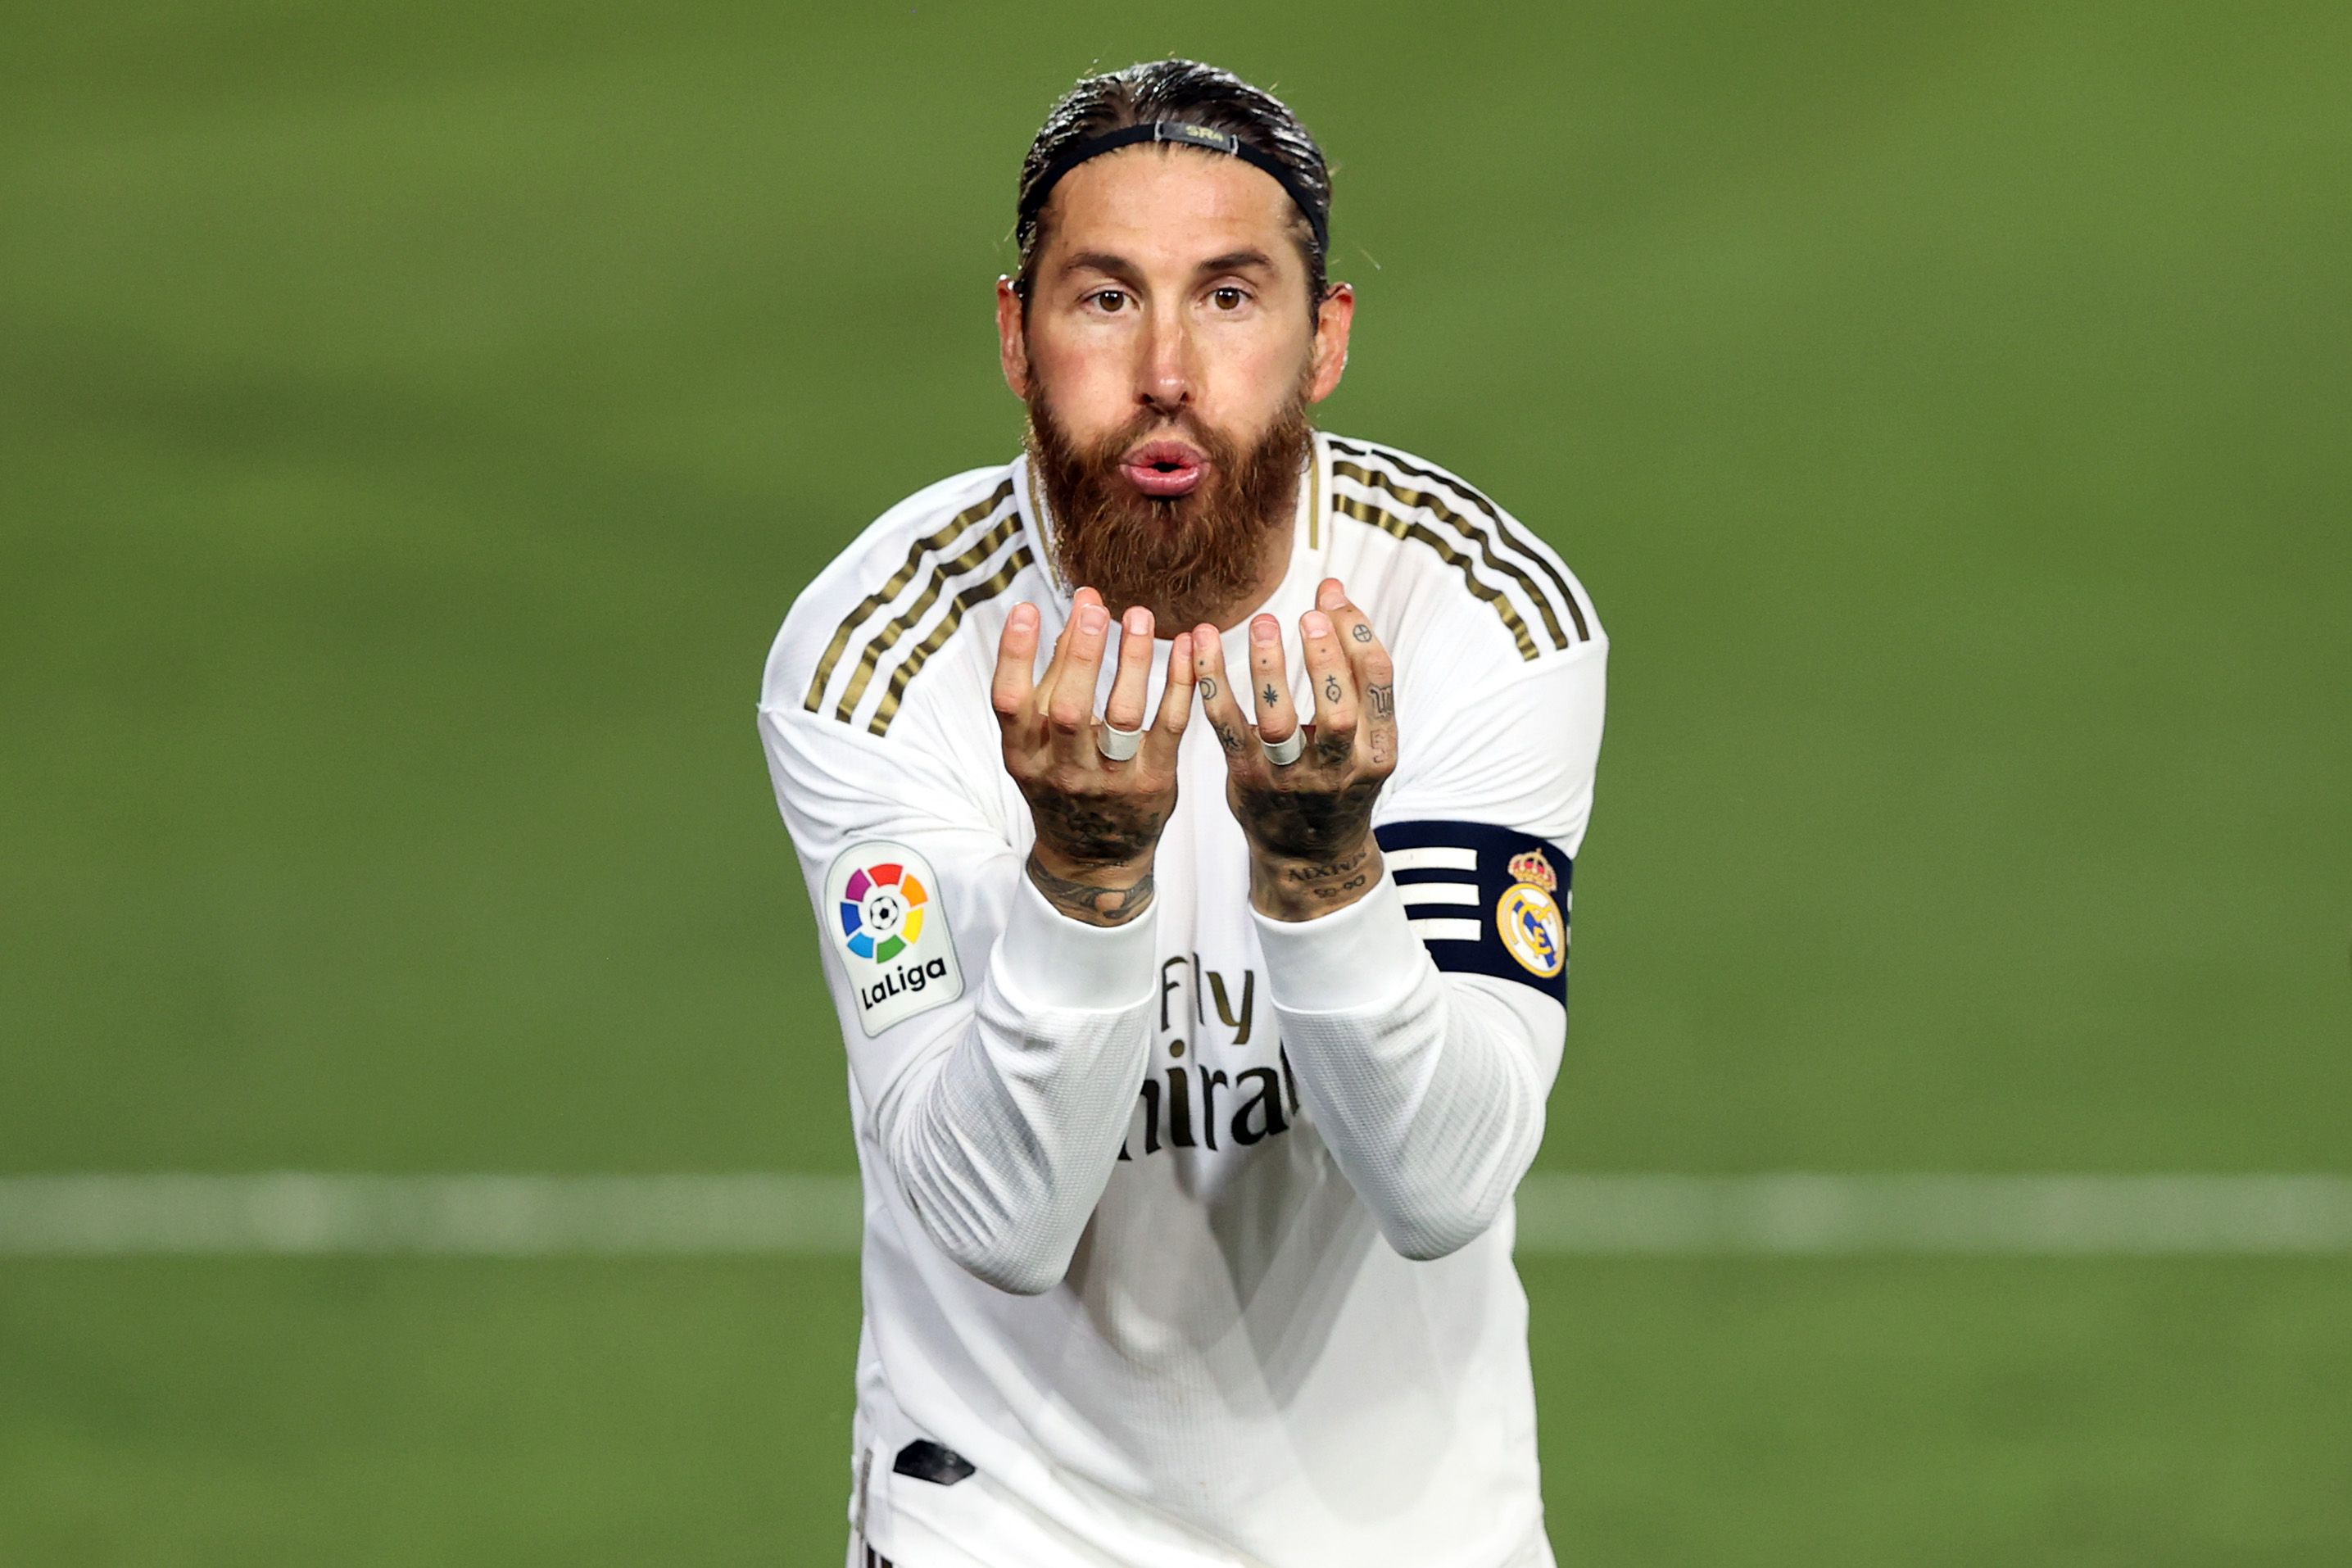 Ramos is the king of the dark arts